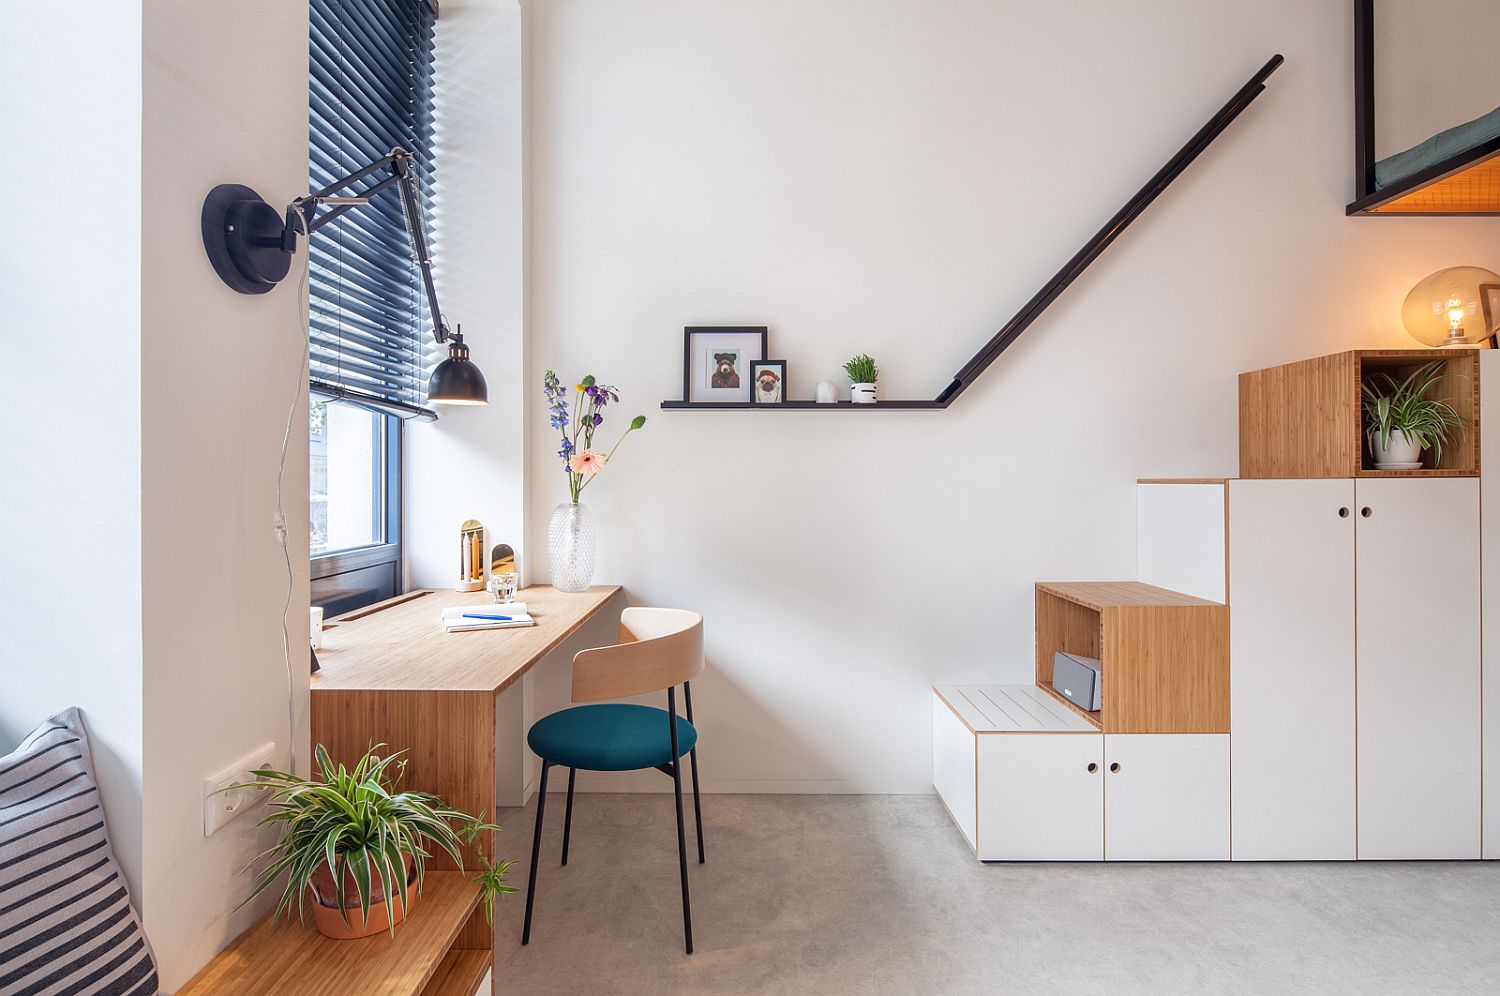 Steps to the loft turned into storage units inside the tiny apartment